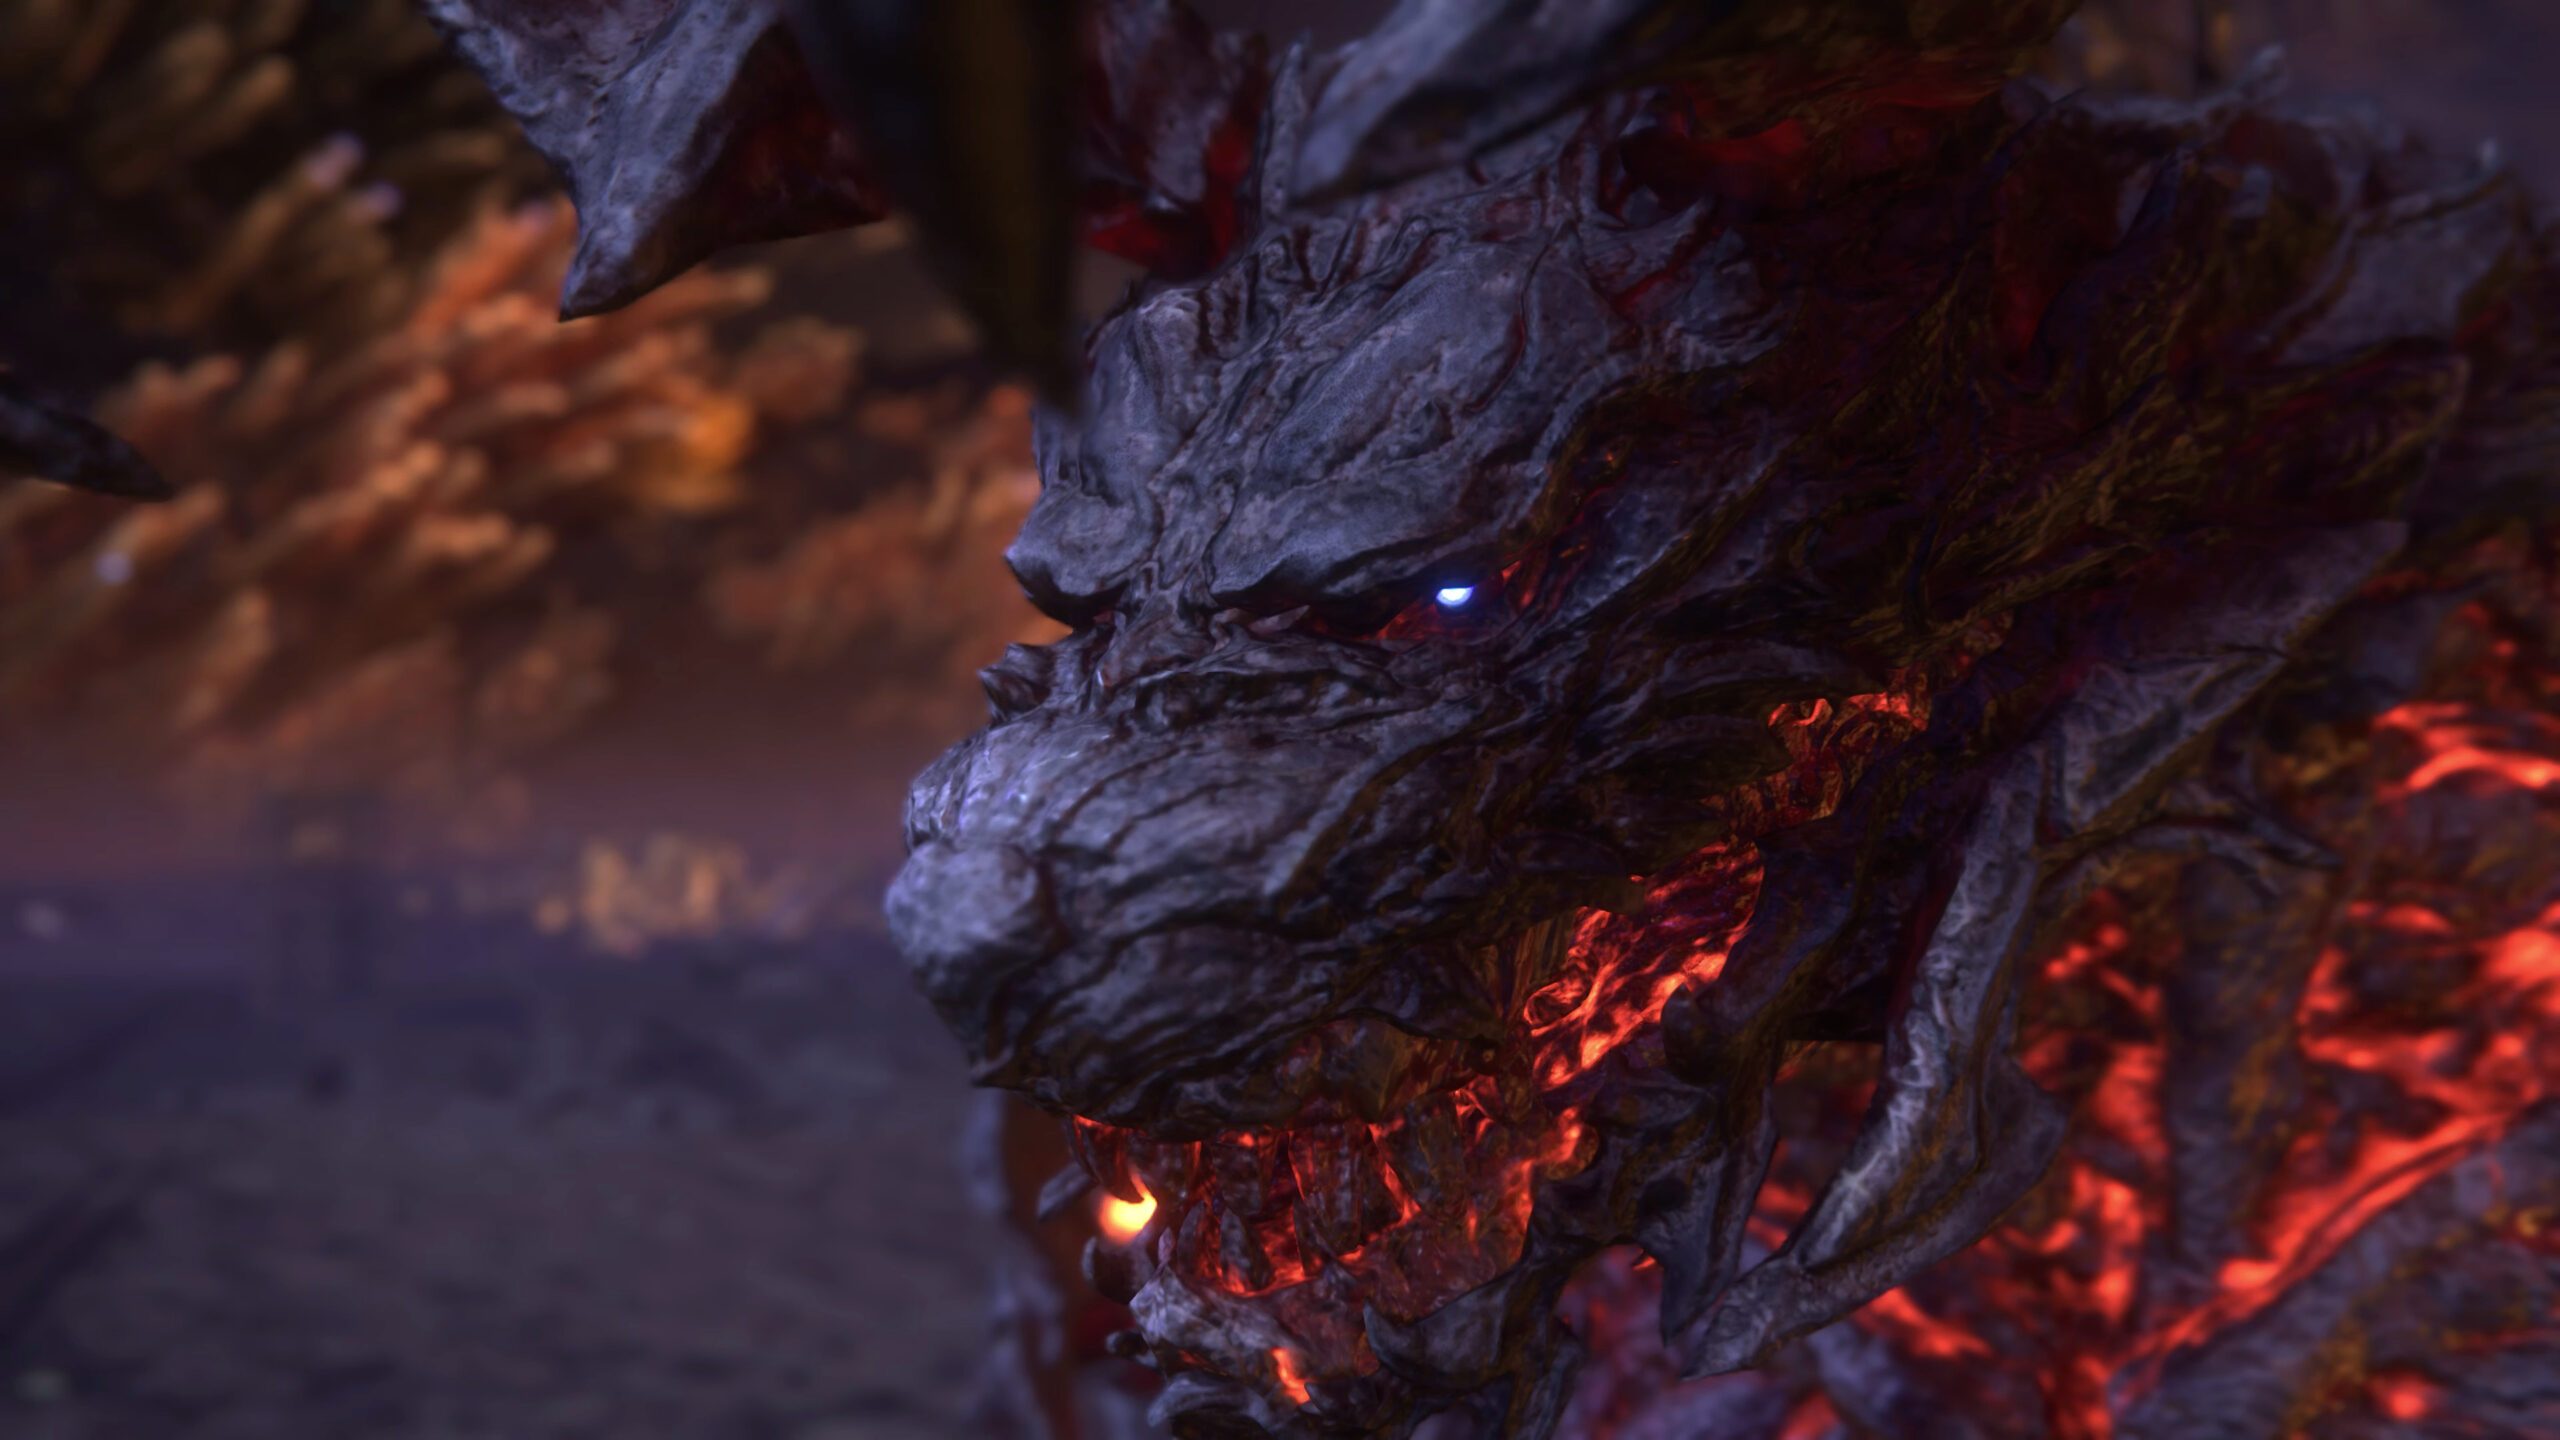 A close up of the Eikon Ifrit’s face. A red glow pulses through his teeth, contrasting with the pale blue in his eyes. 